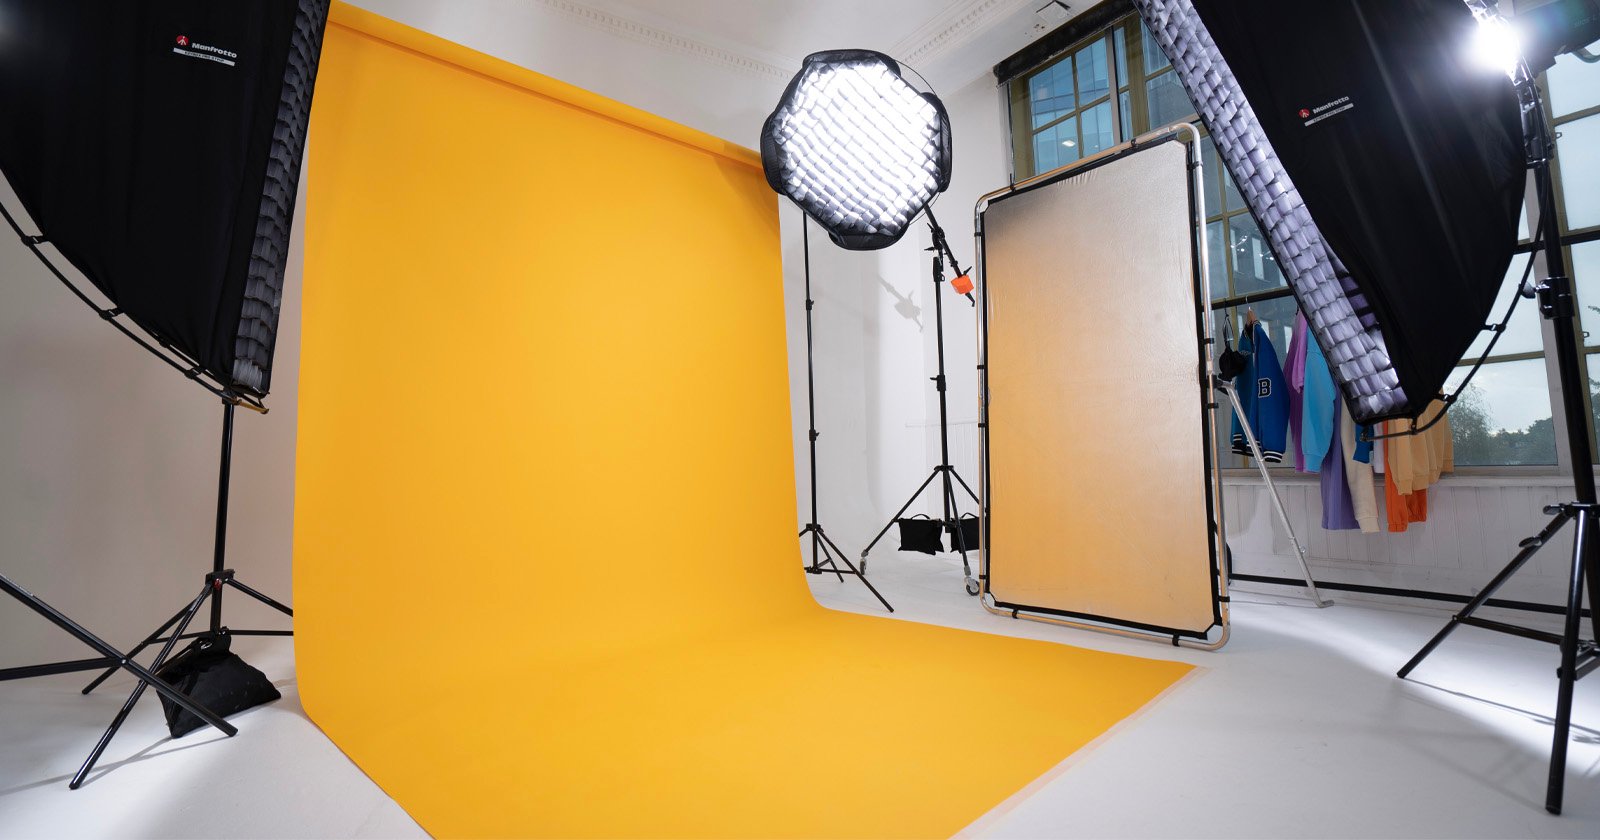 A Savage Universal backdrop in a photo studio